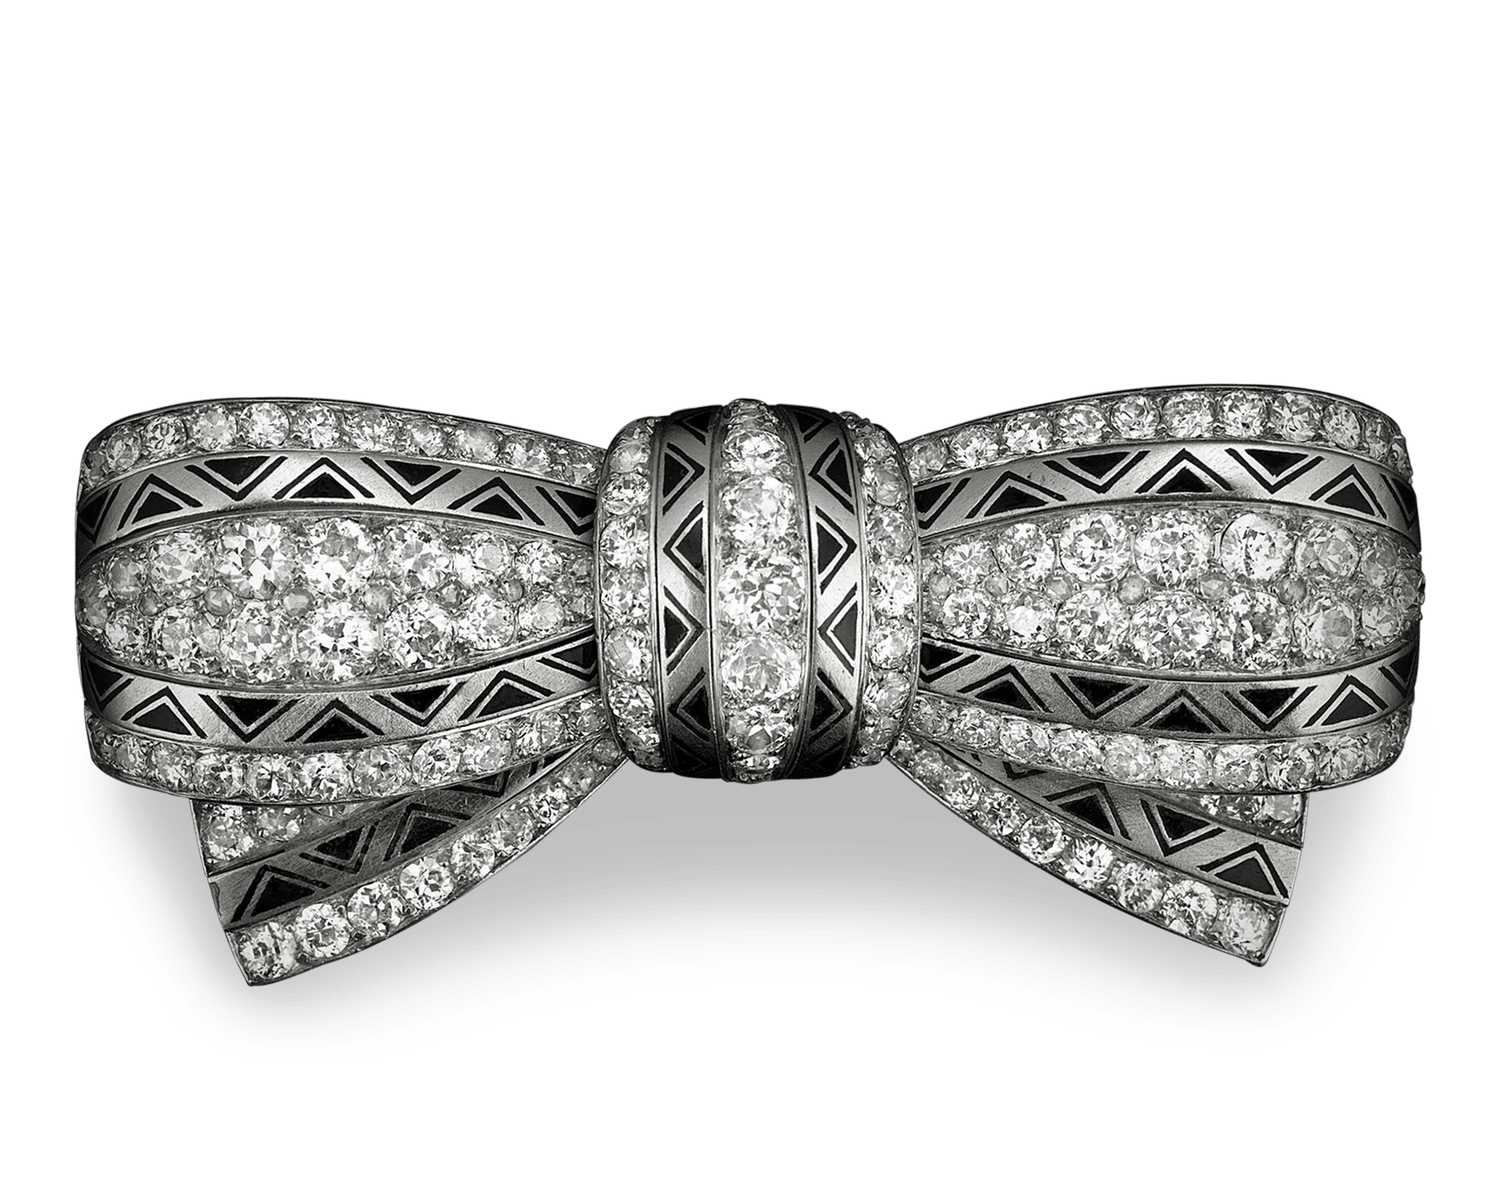 Channel-set diamonds give this Art Deco-period brooch magnificent sparkle